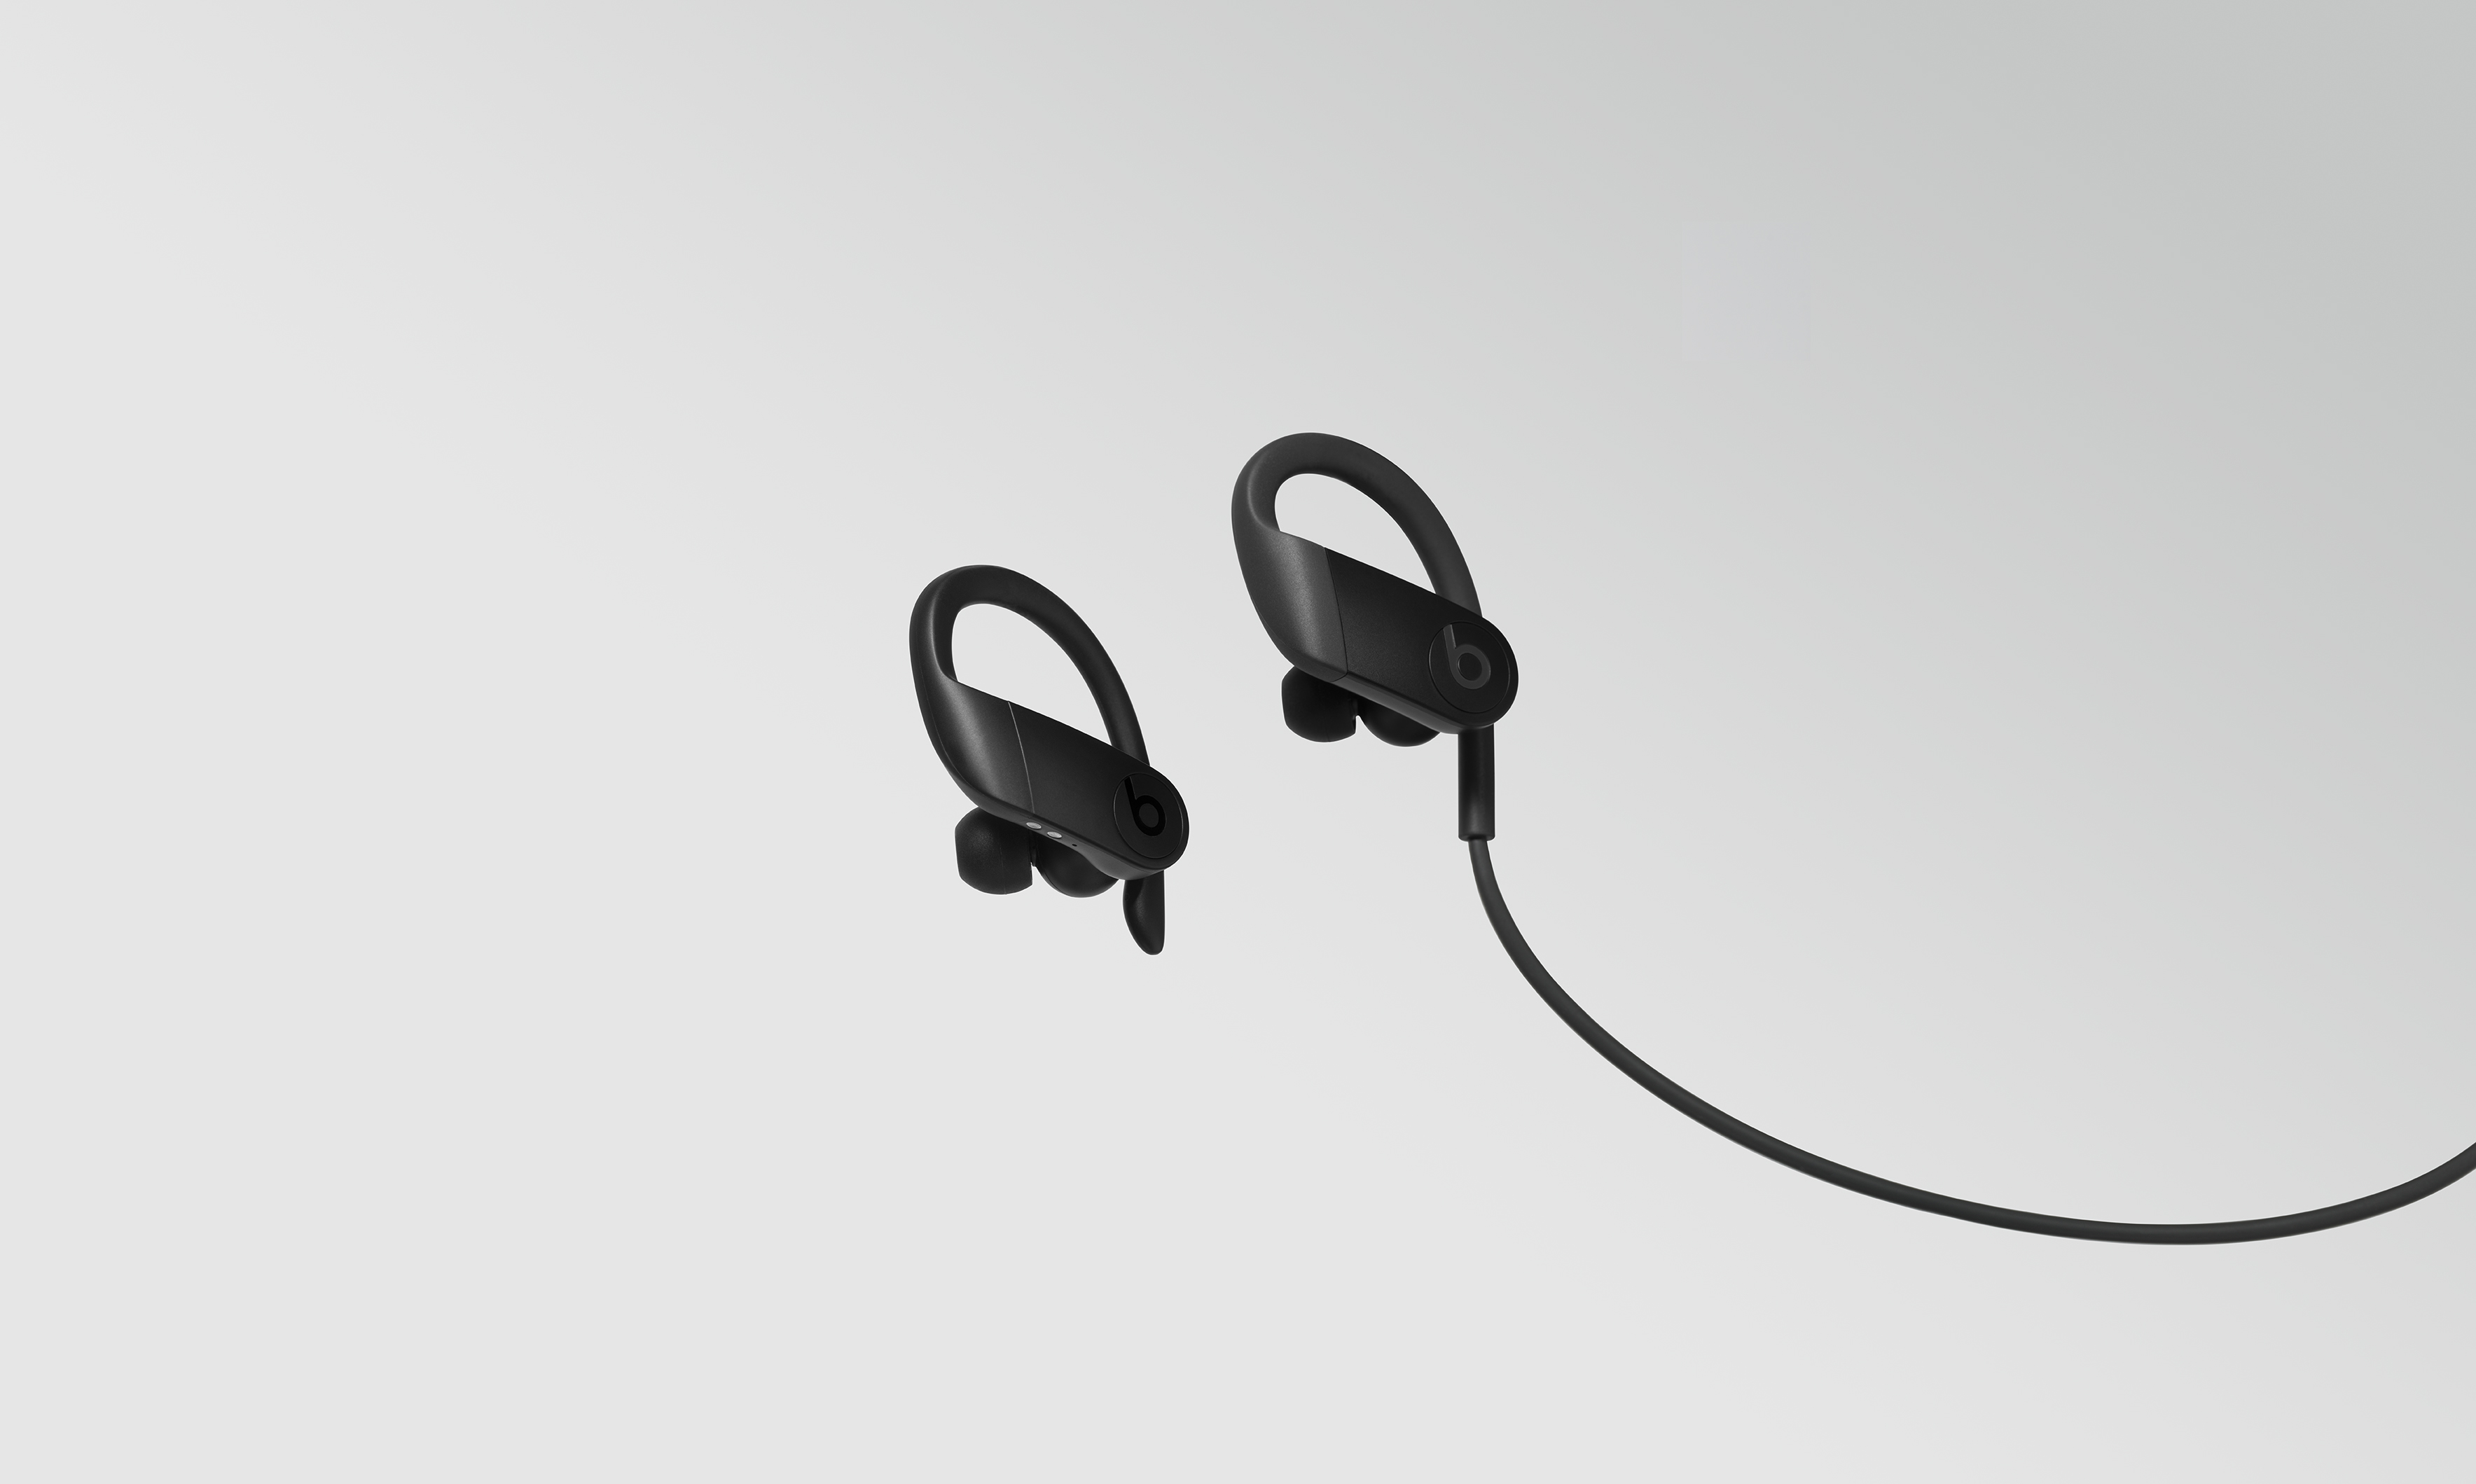 All-new Powerbeats replacing Powerbeats3 $50 less, hours more battery, 'Pro' design 9to5Mac